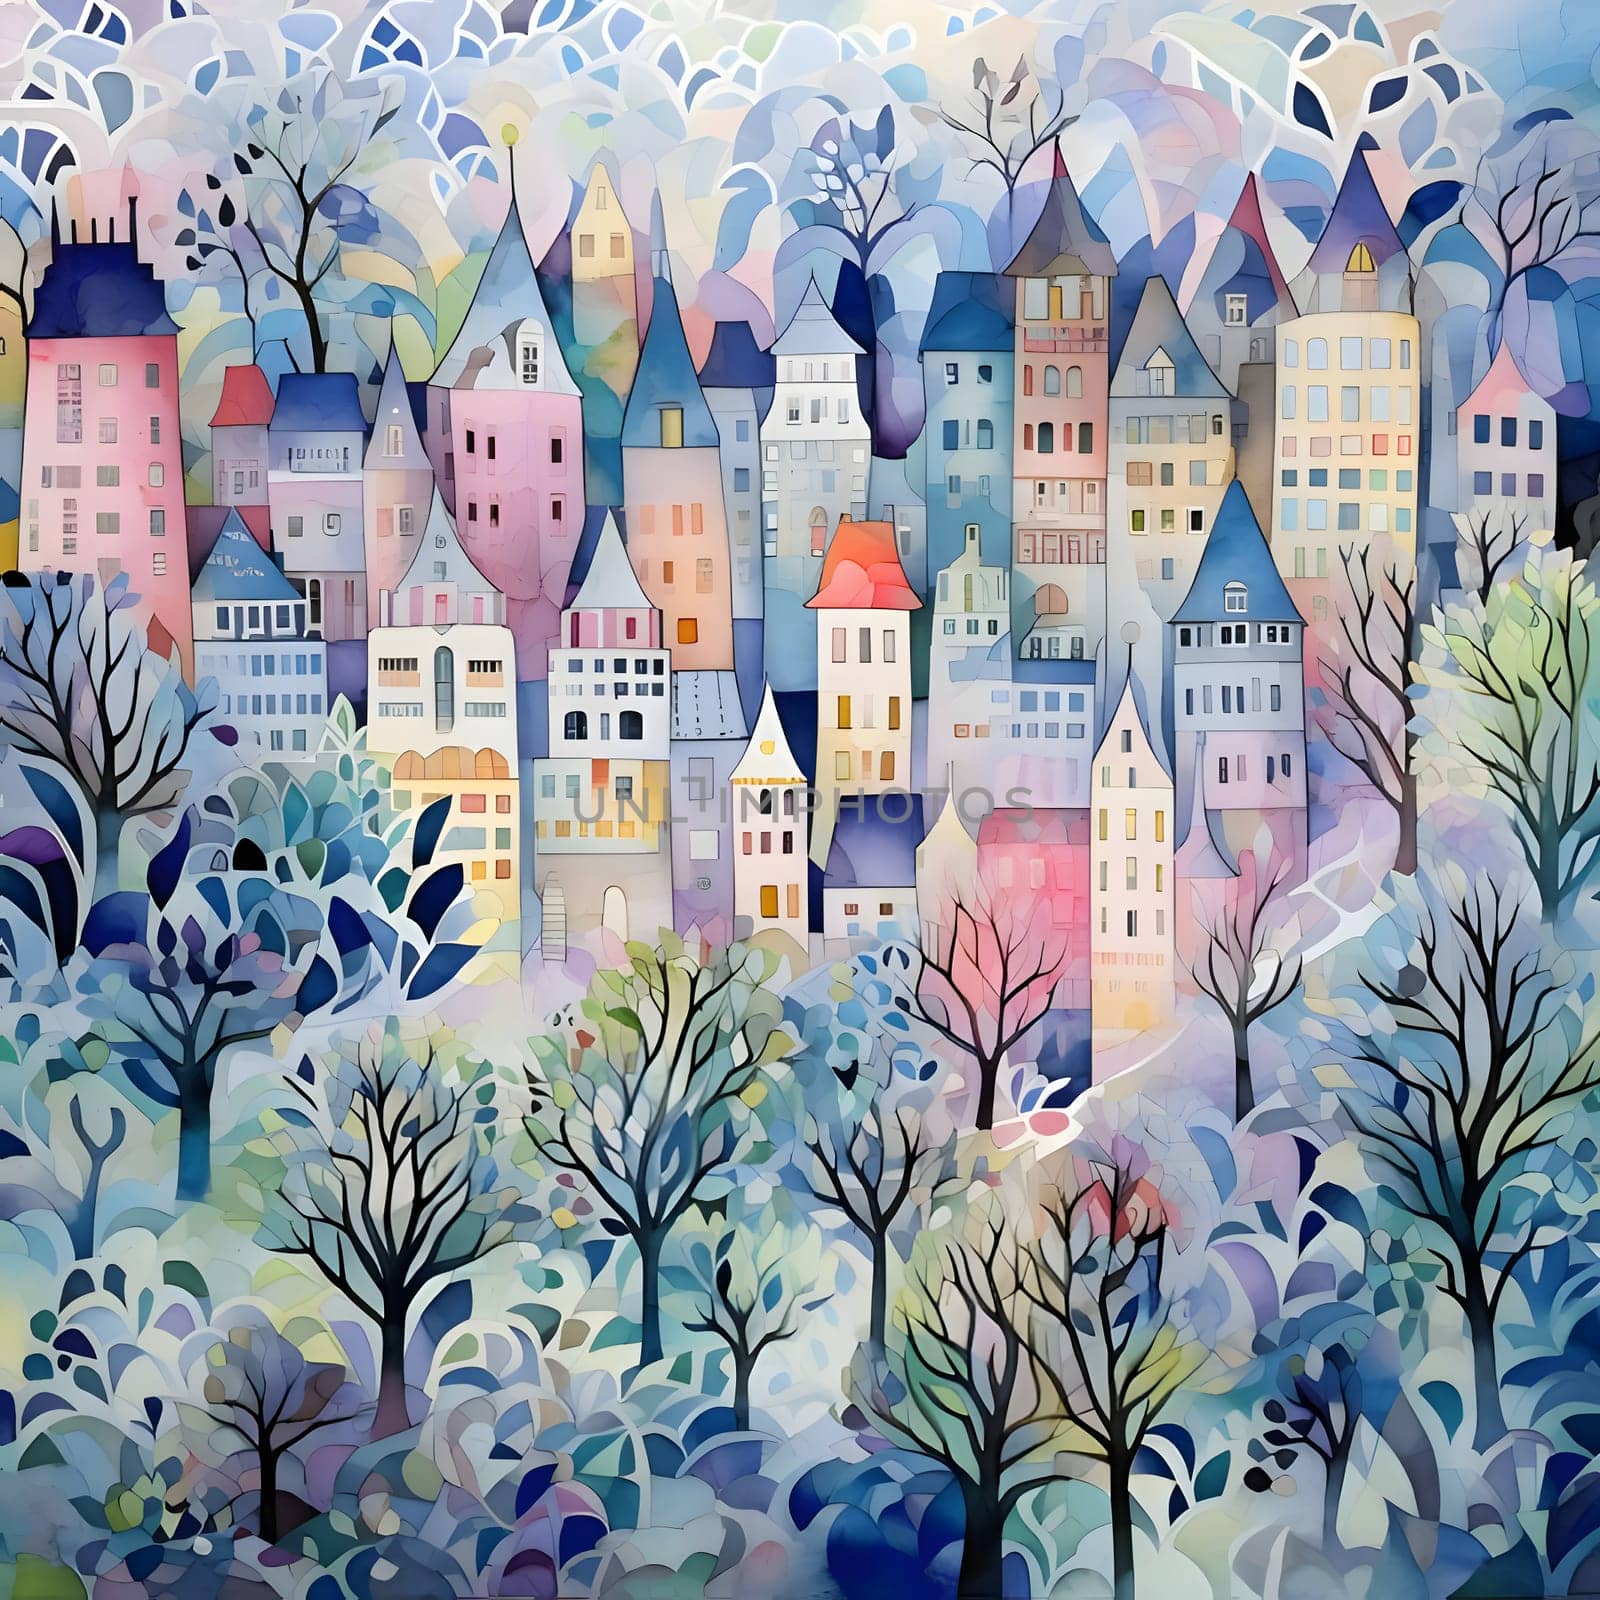 Patterns and banners backgrounds: Winter cityscape. Watercolor hand drawn illustration. Colorful background.